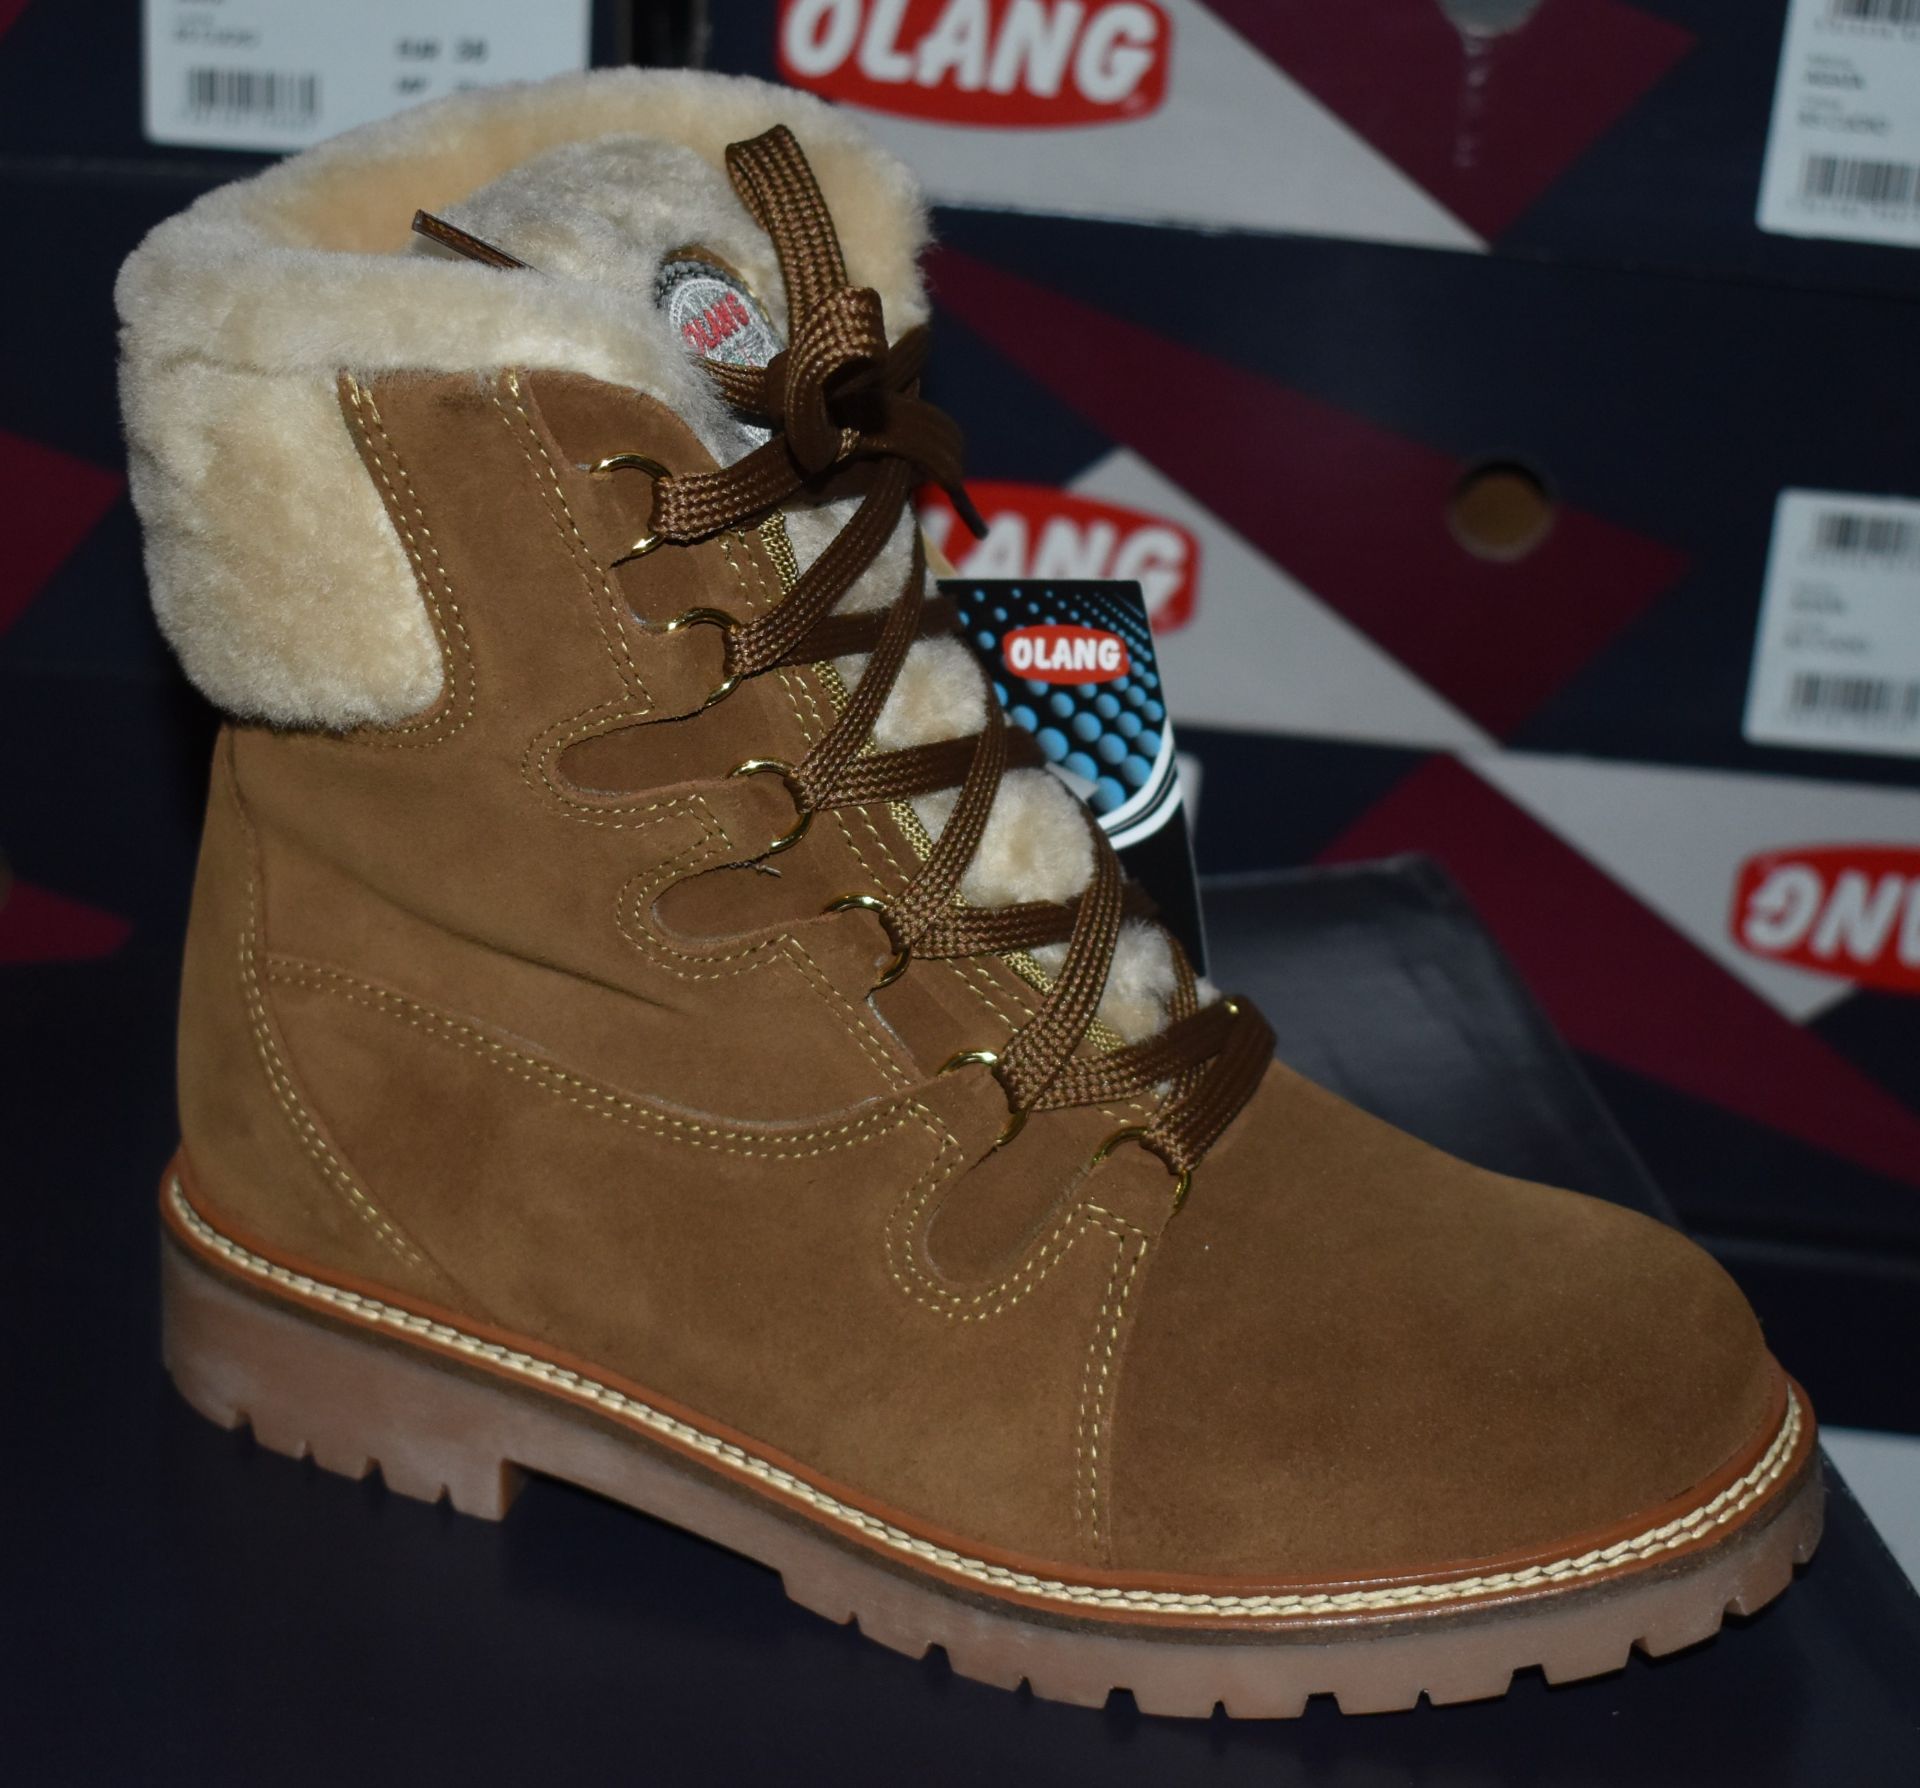 1 x Pair of Designer Olang Meribel 85 CUOIO Women's Winter Boots - Euro Size 40 - Brand New Boxed - Image 6 of 8